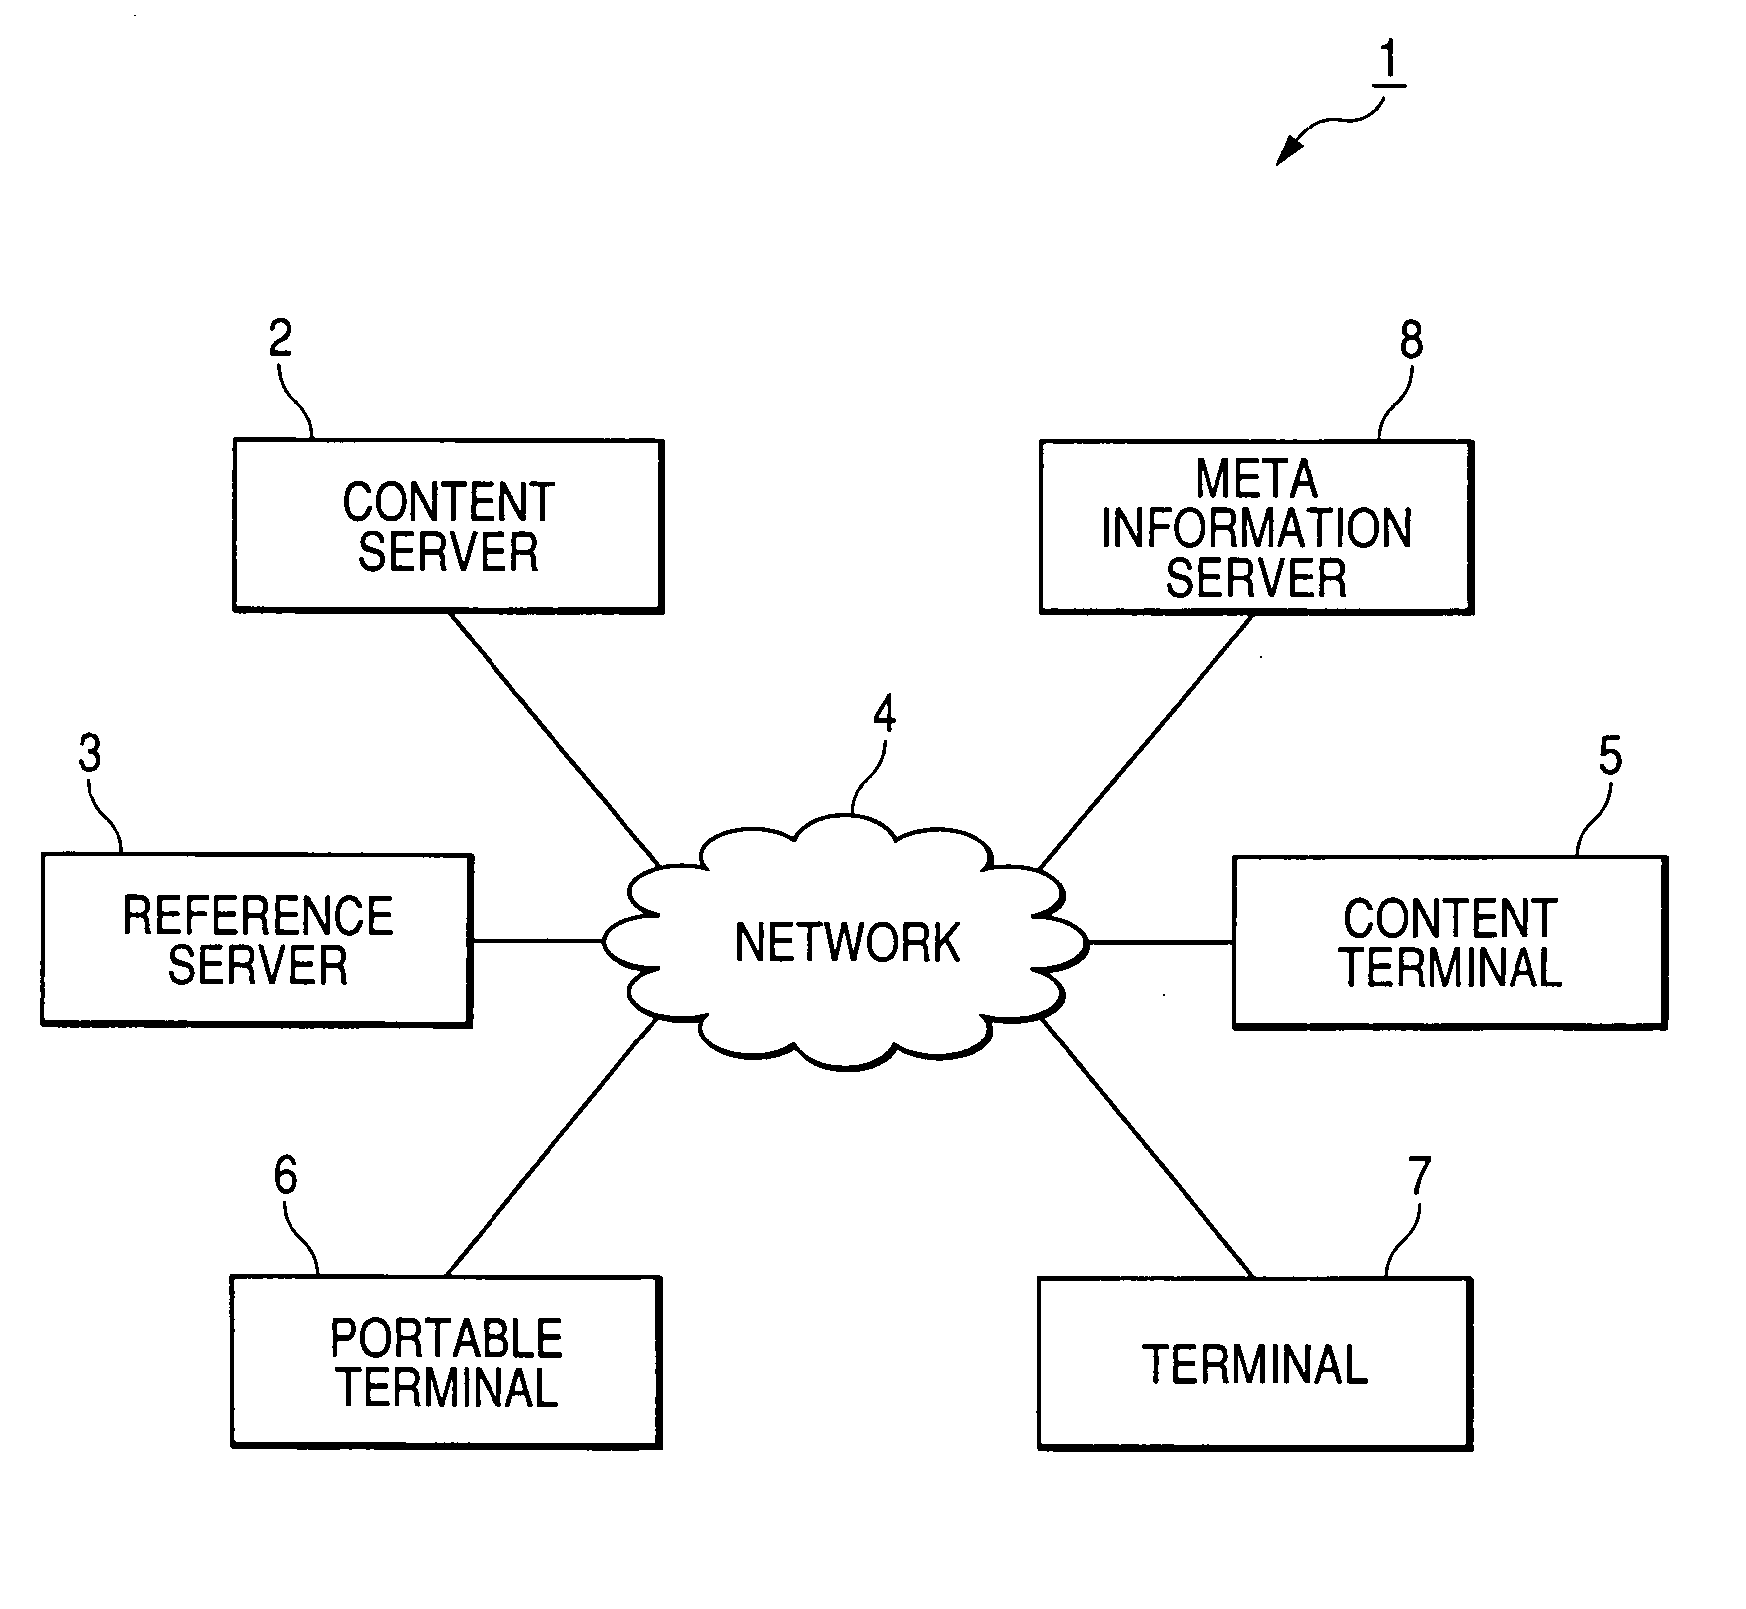 Content system, content terminal, reference server, content program, and reference program